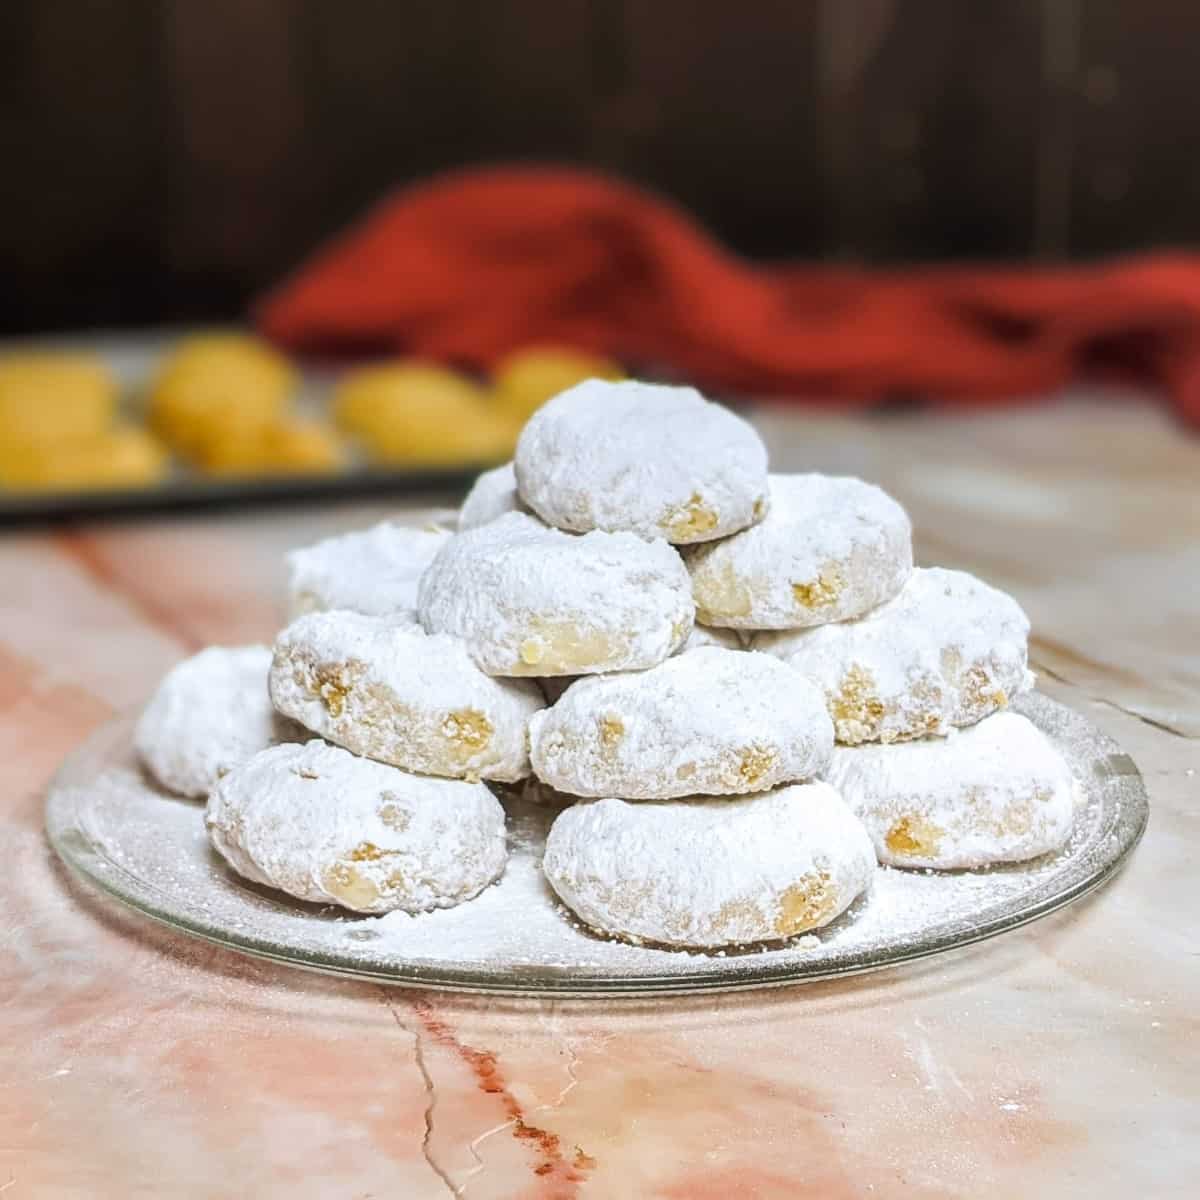 Kourabiedes served on a grey plate and dusting with powdered sugar.